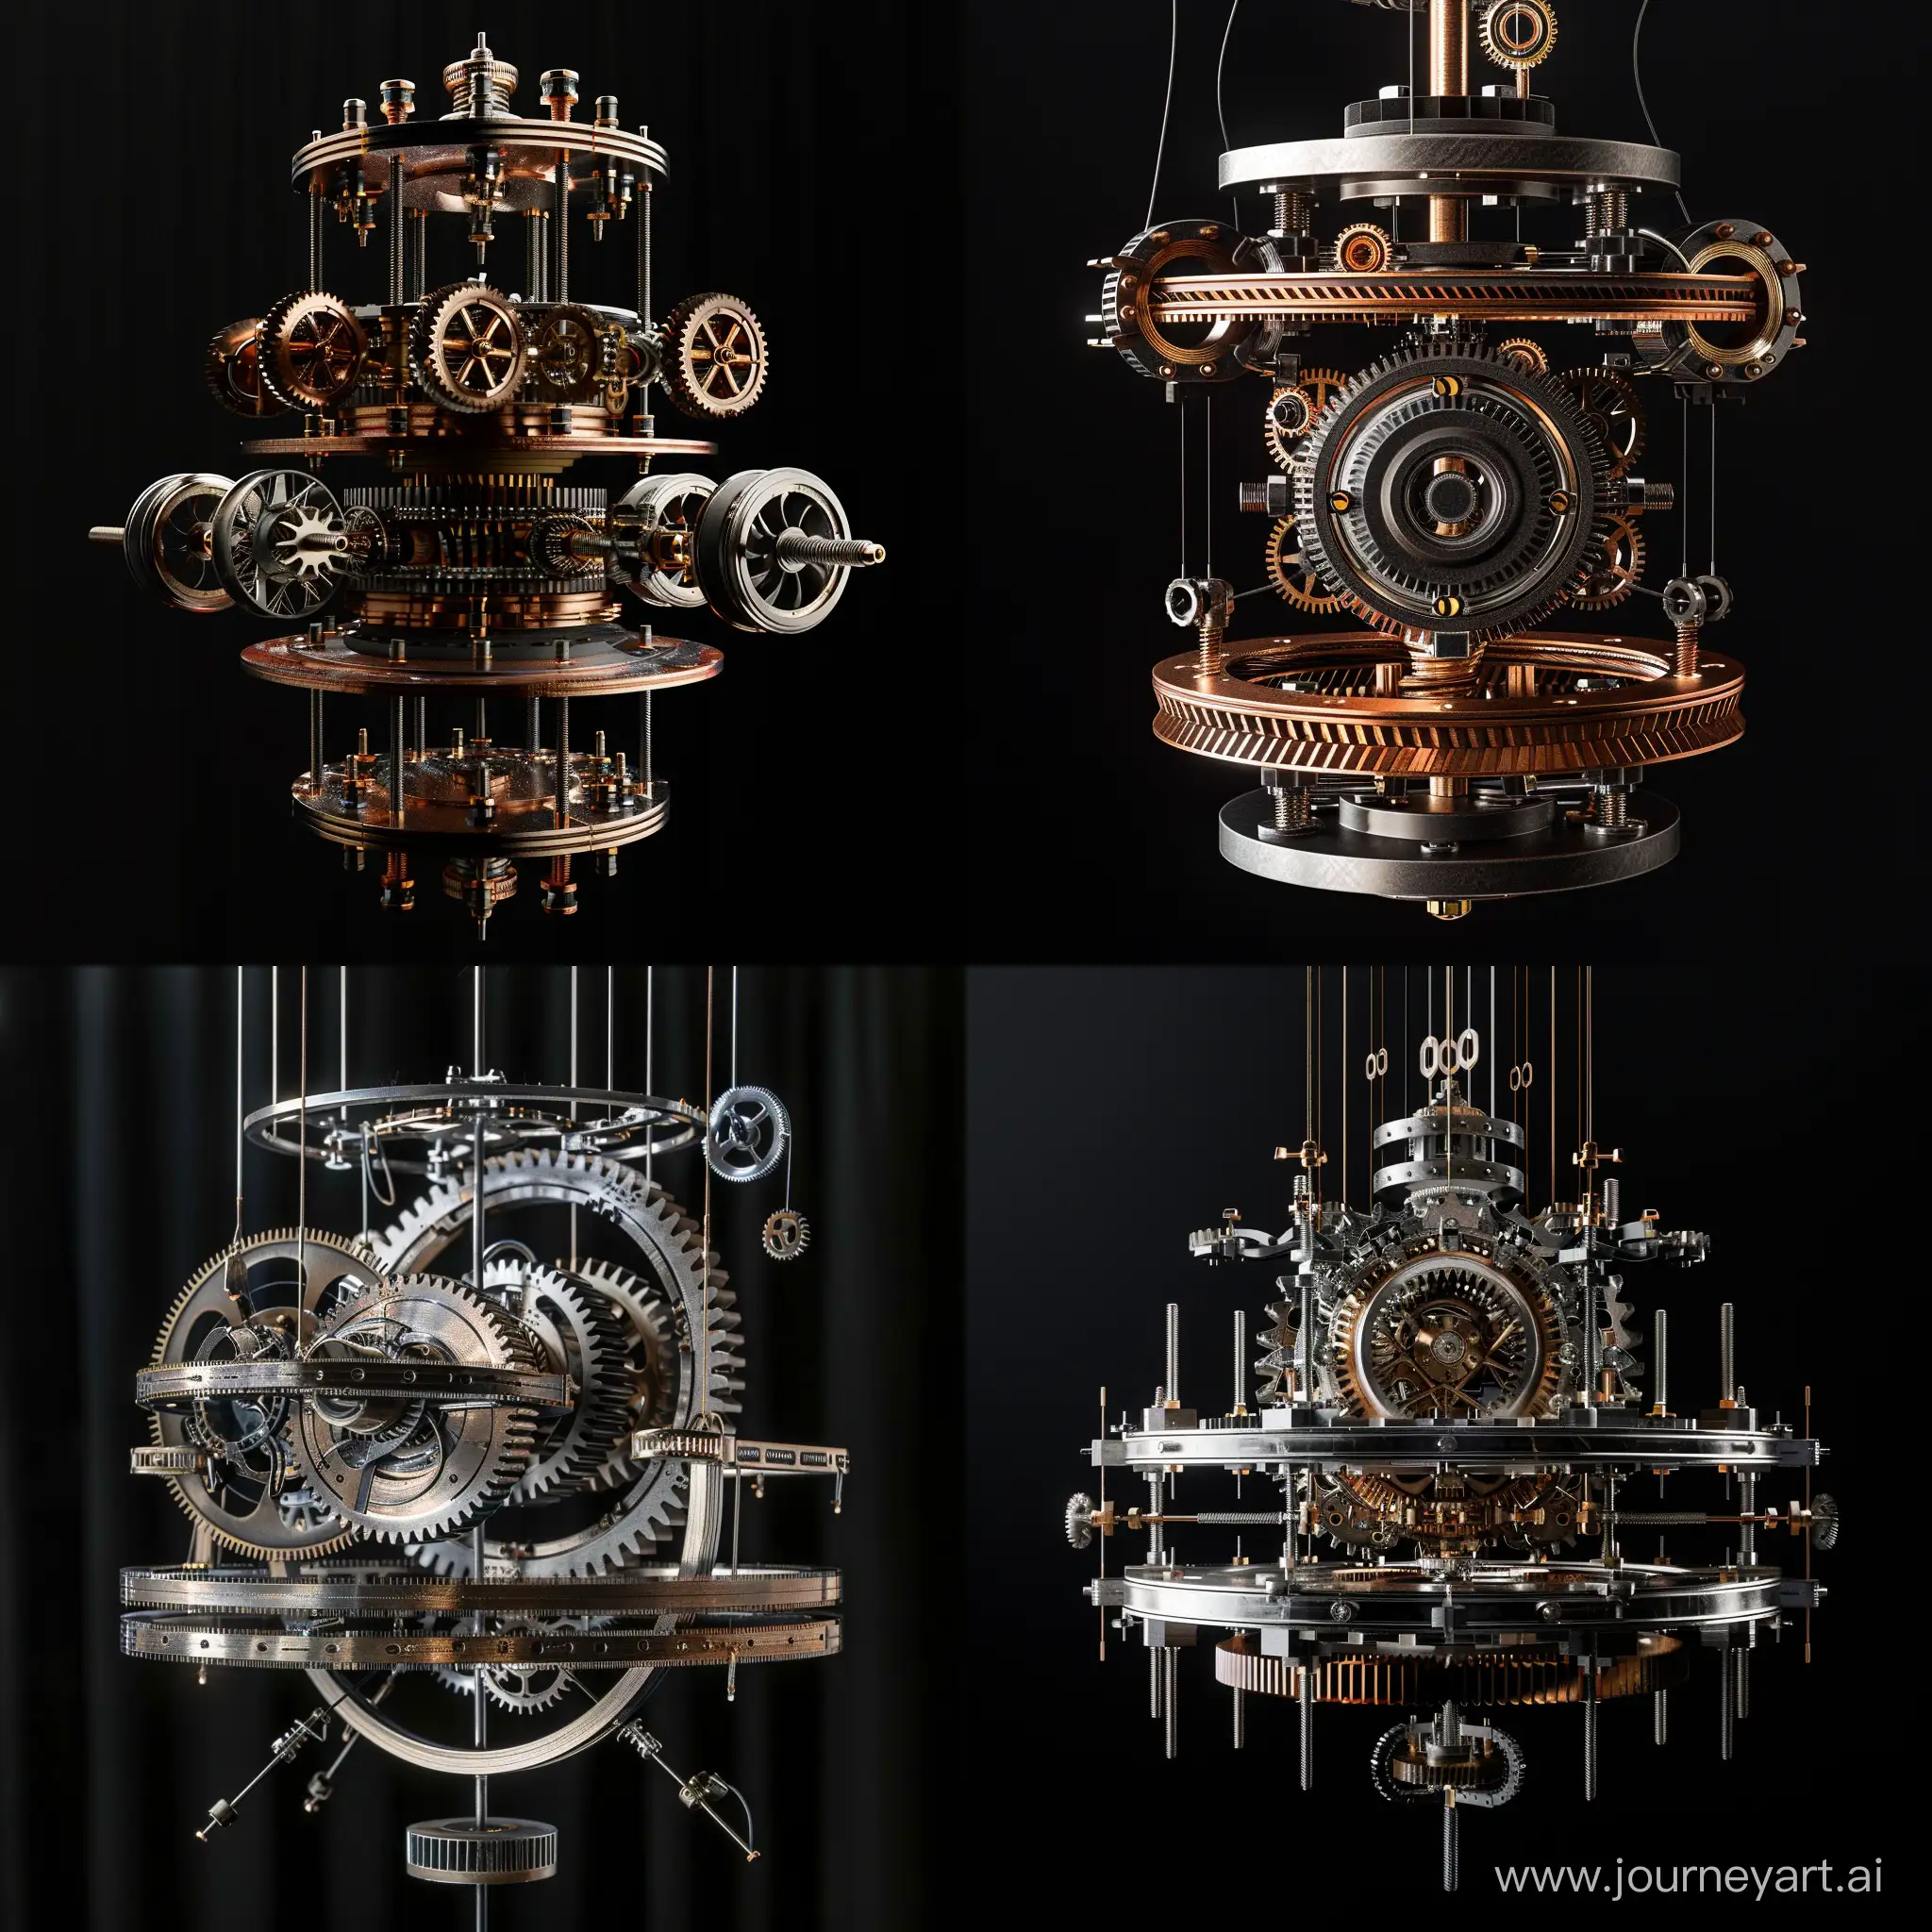 Eternal-Motion-Symphony-Mesmerizing-Dance-of-Gears-and-Coils-for-Endless-Energy